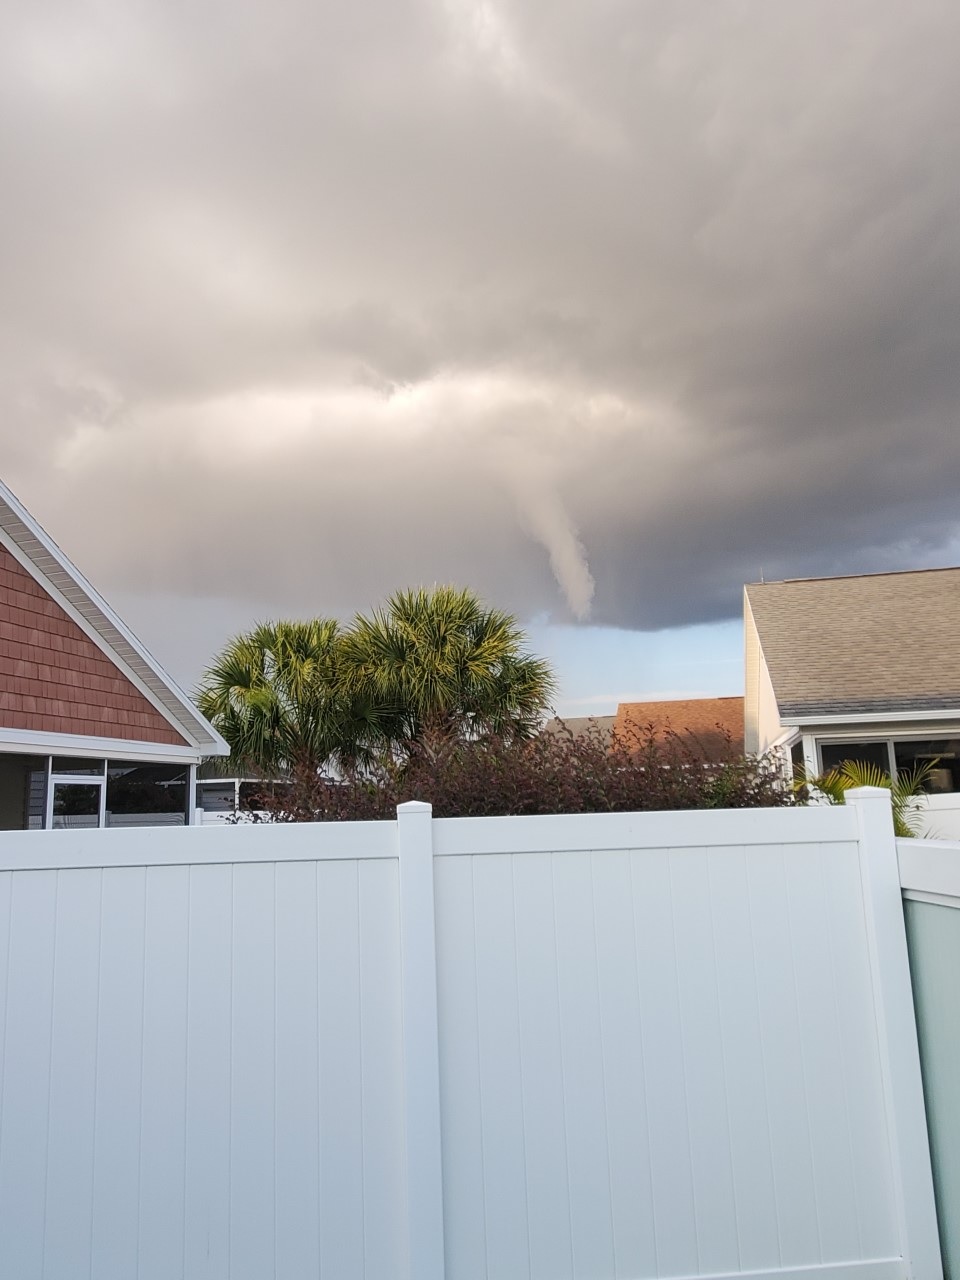 Cold Air Funnel Over Lake Sumter Landing